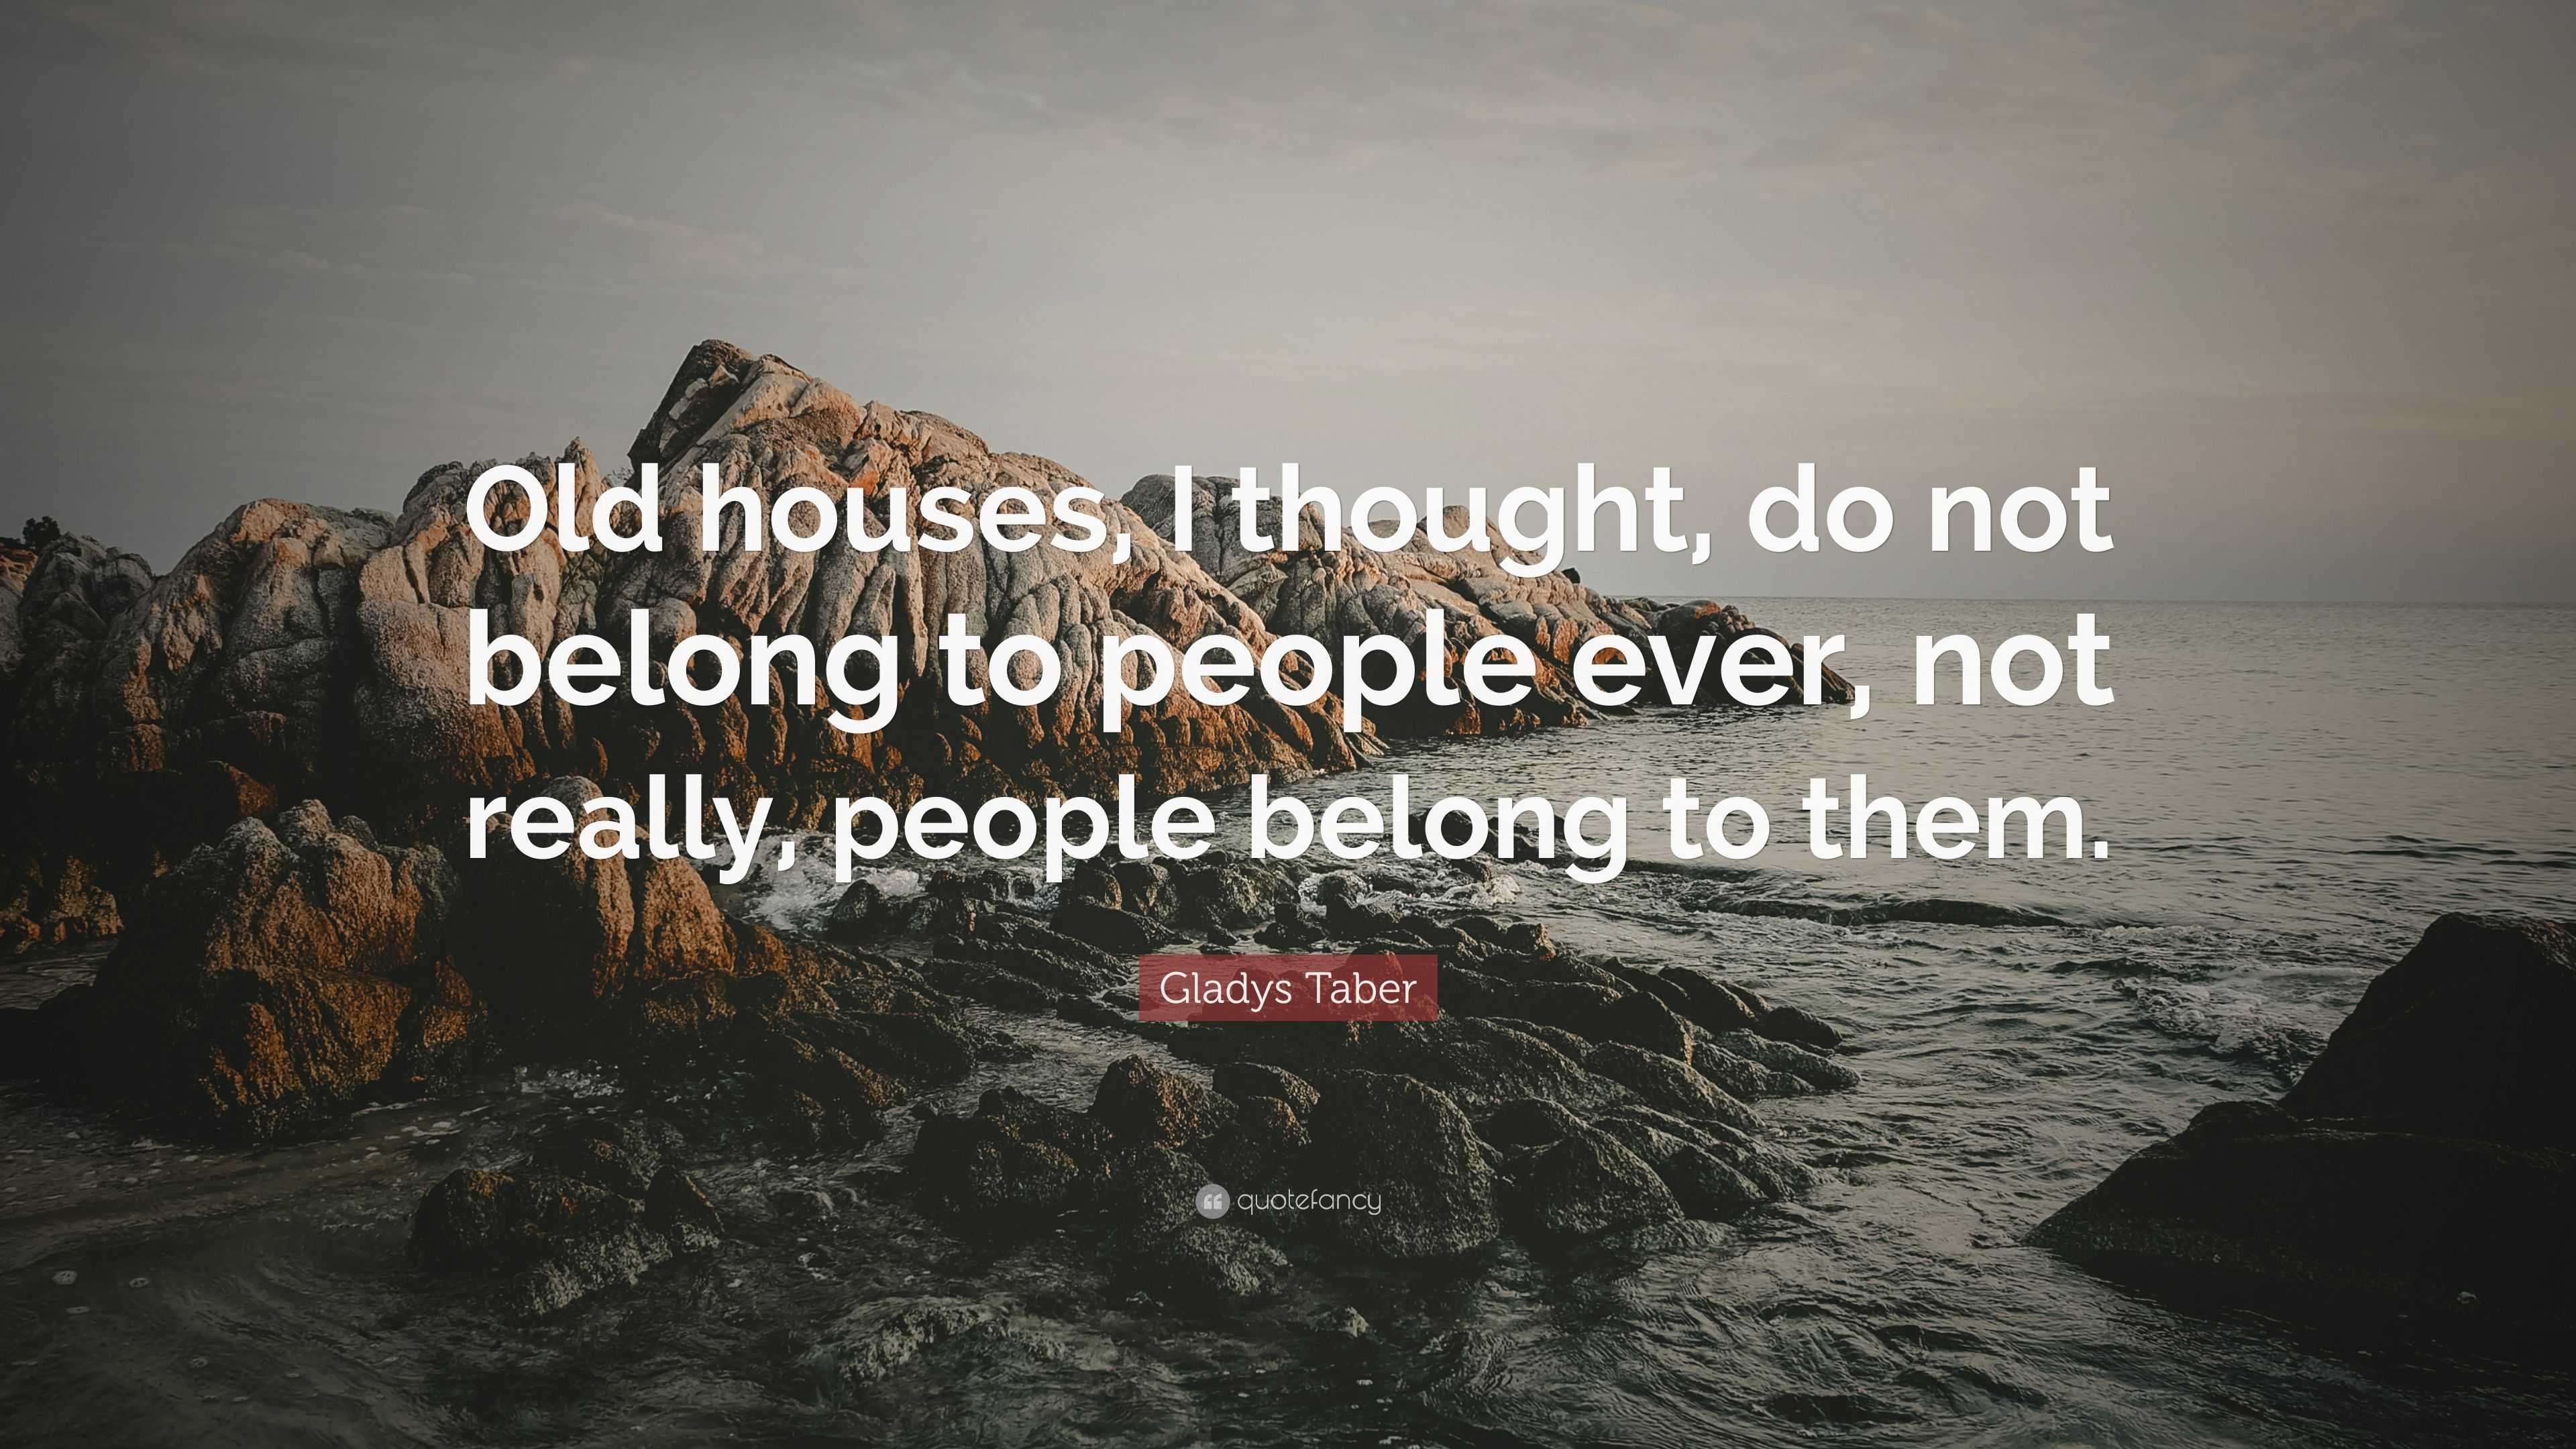 Gladys Taber Quote: “Old houses, I thought, do not belong to people ...